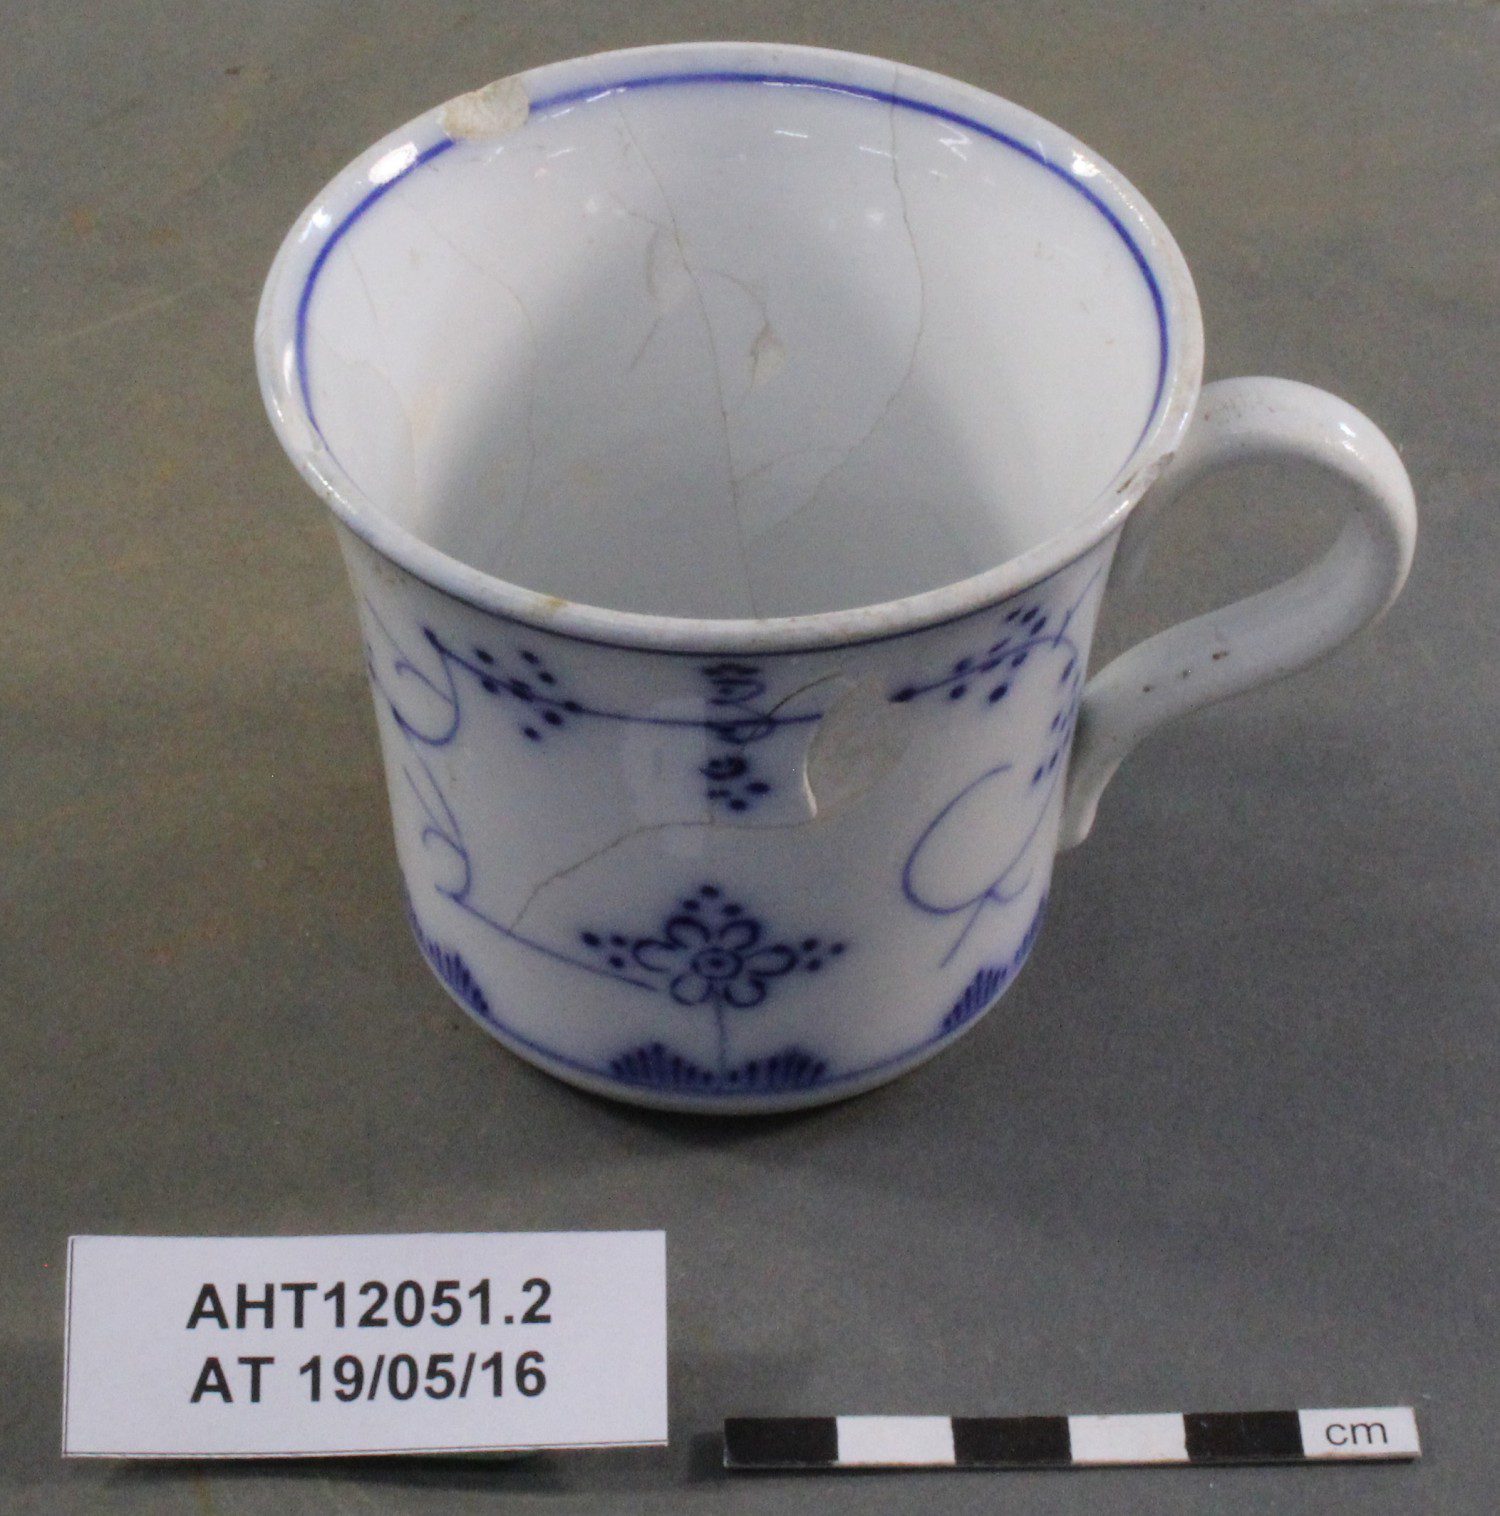 The bone china teacup after conservation